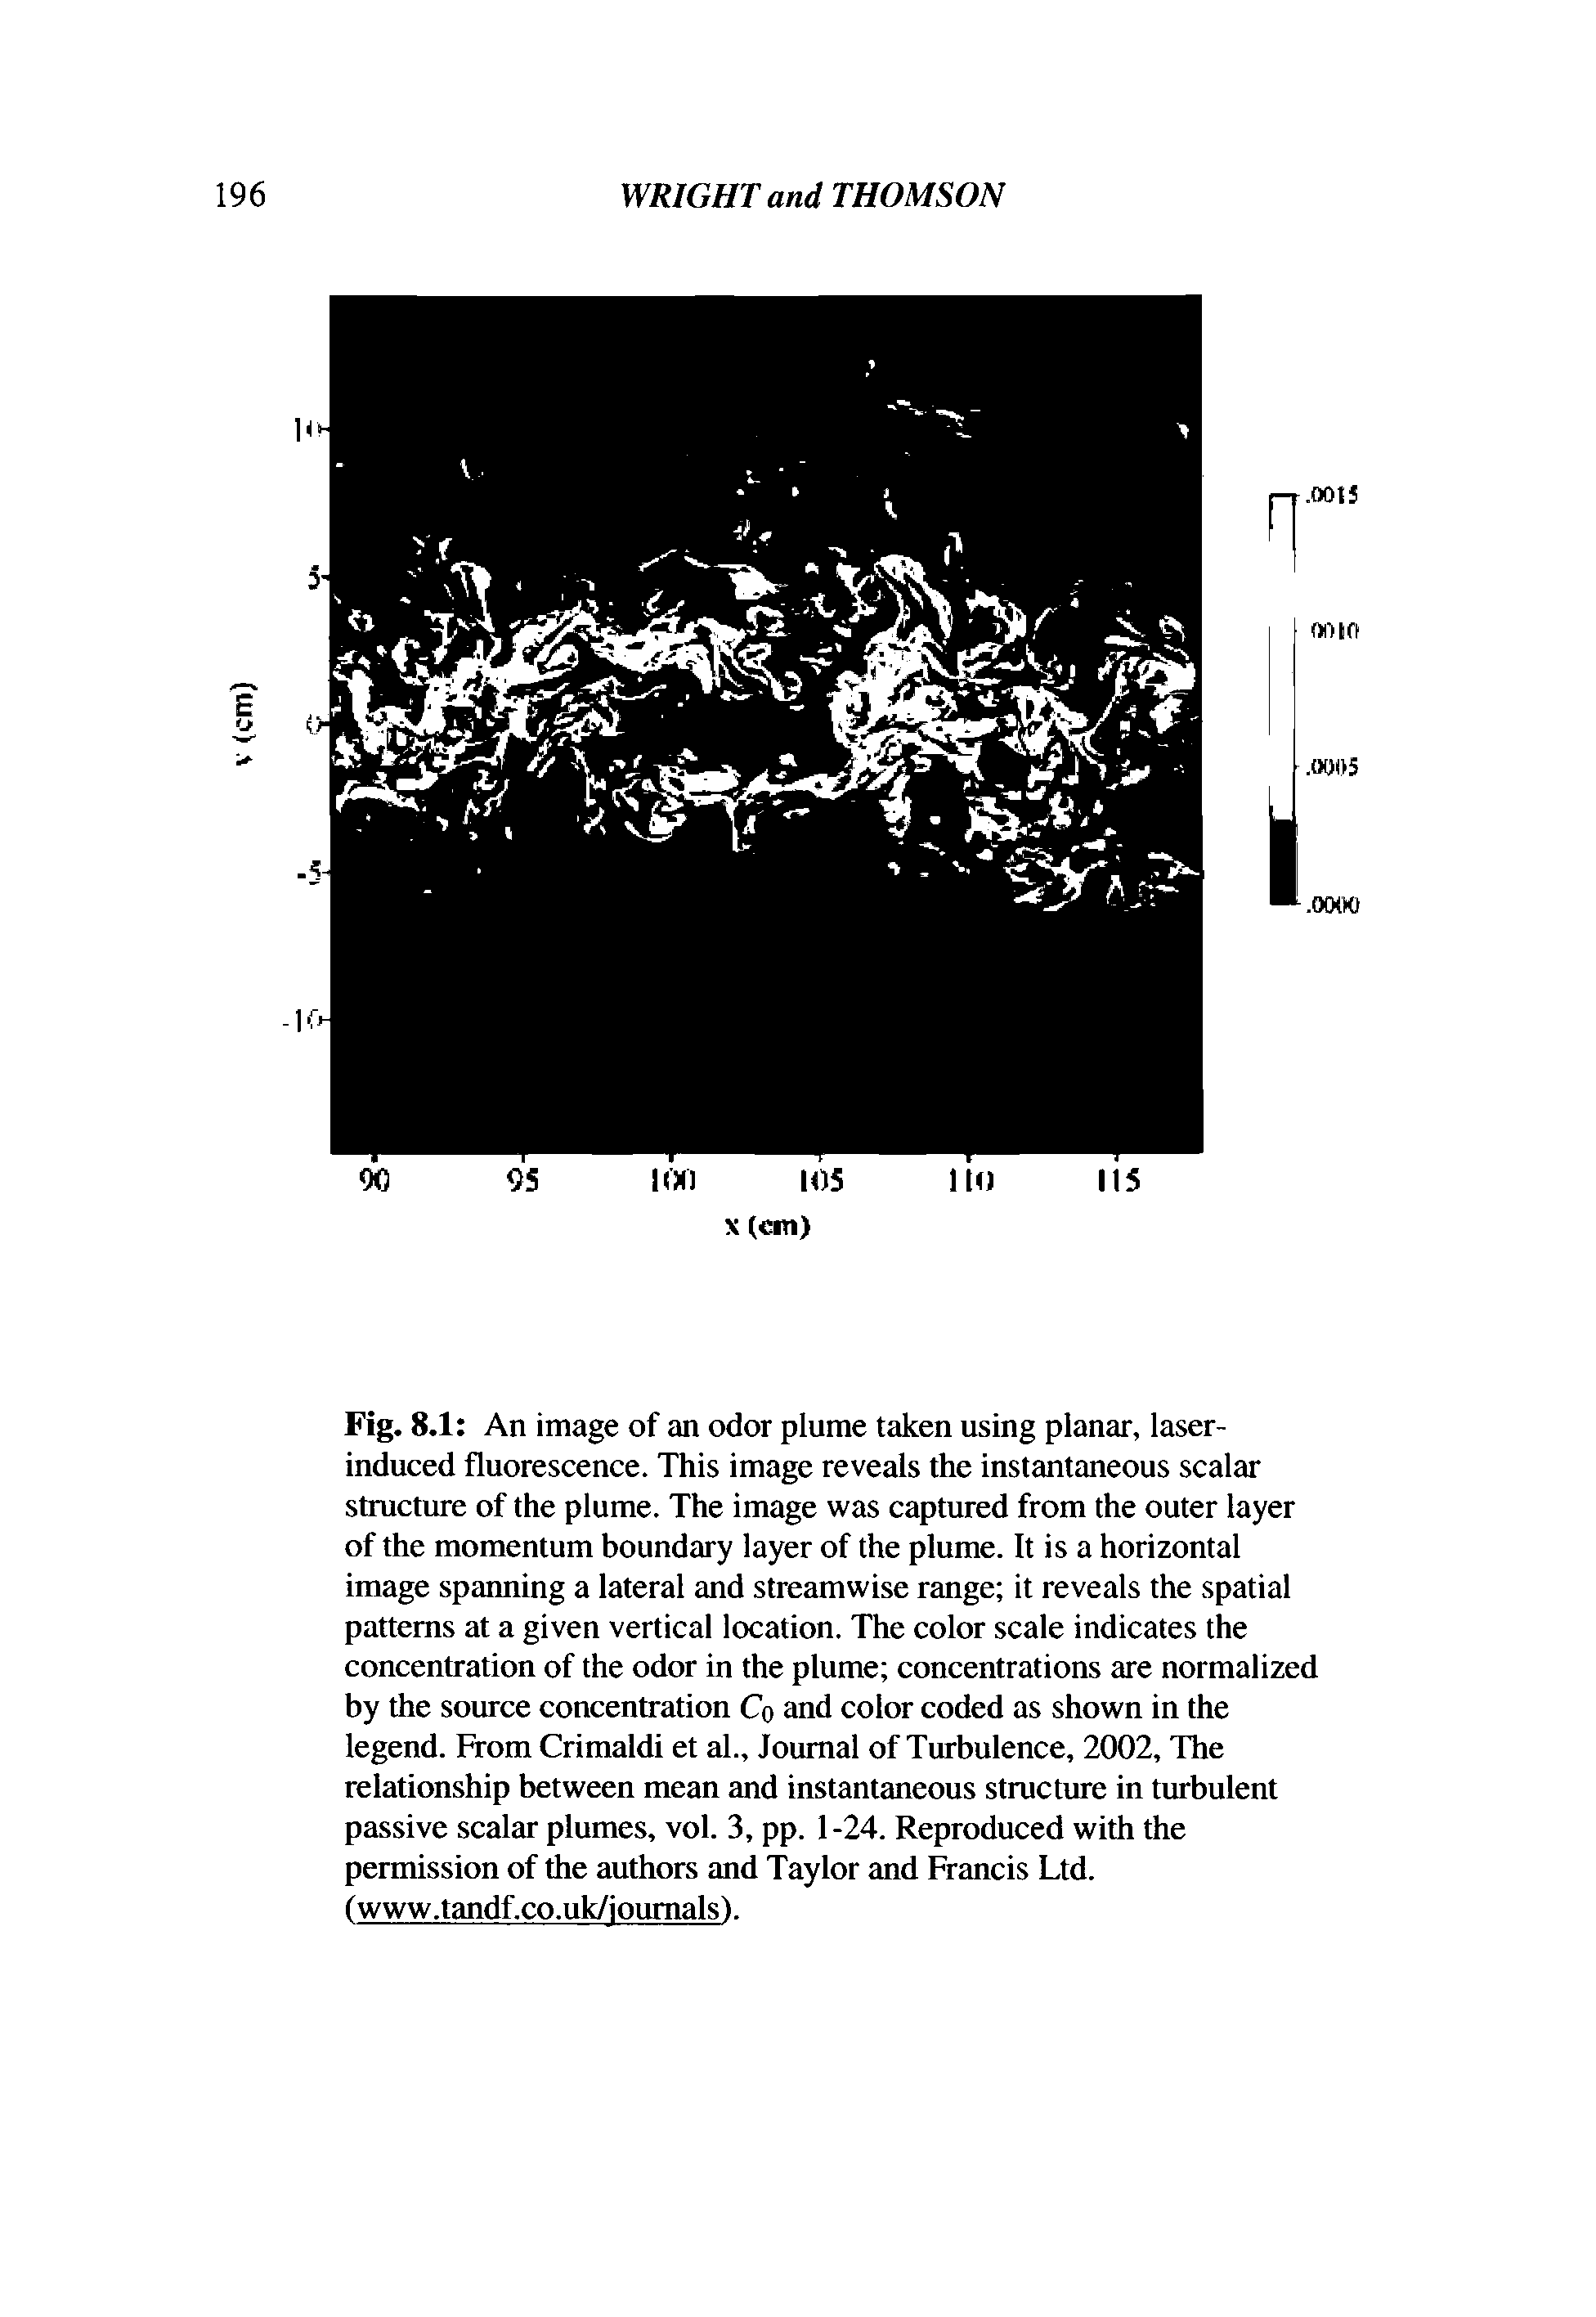 Fig. 8.1 An image of an odor plume taken using planar, laser-induced fluorescence. This image reveals the instantaneous scalar structure of the plume. The image was captured from the outer layer of the momentum boundary layer of the plume. It is a horizontal image spanning a lateral and streamwise range it reveals the spatial patterns at a given vertical location. The color scale indicates the concentration of the odor in the plume concentrations are normalized by the source concentration Co and color coded as shown in the legend. From Grimaldi et al.. Journal of Turbulence, 2002, The relationship between mean and instantaneous structure in turbulent passive scalar plumes, vol. 3, pp. 1-24. Reproduced with the permission of the authors and Taylor and Francis Ltd. (www.tandf.co.uk/ioumals).